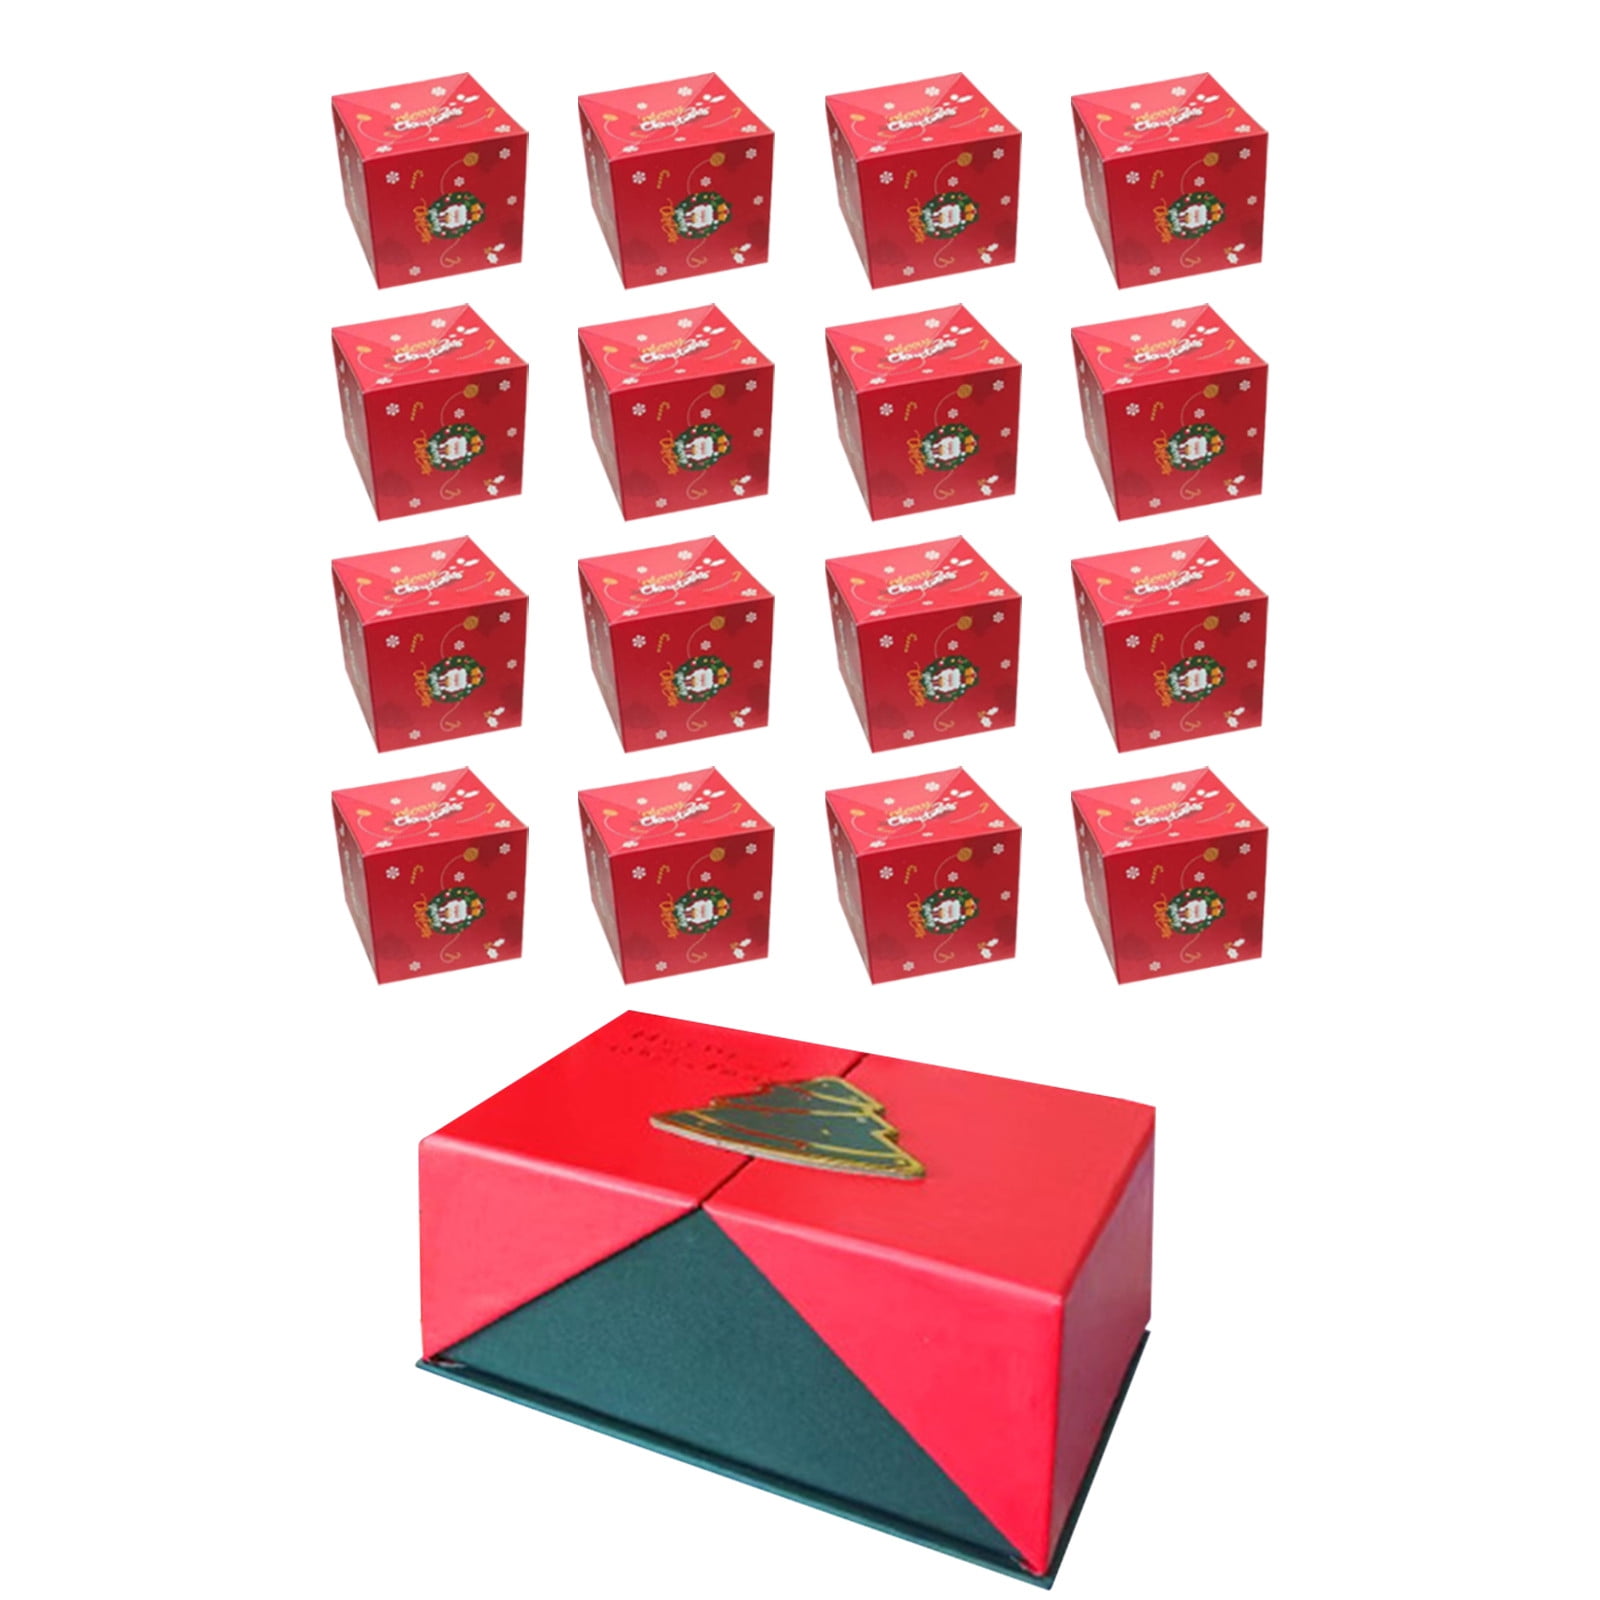 Waroomhouse Money Packing Box Surprise Delight with Bounce Gift Box Set  Perfect for Birthdays Proposals More 